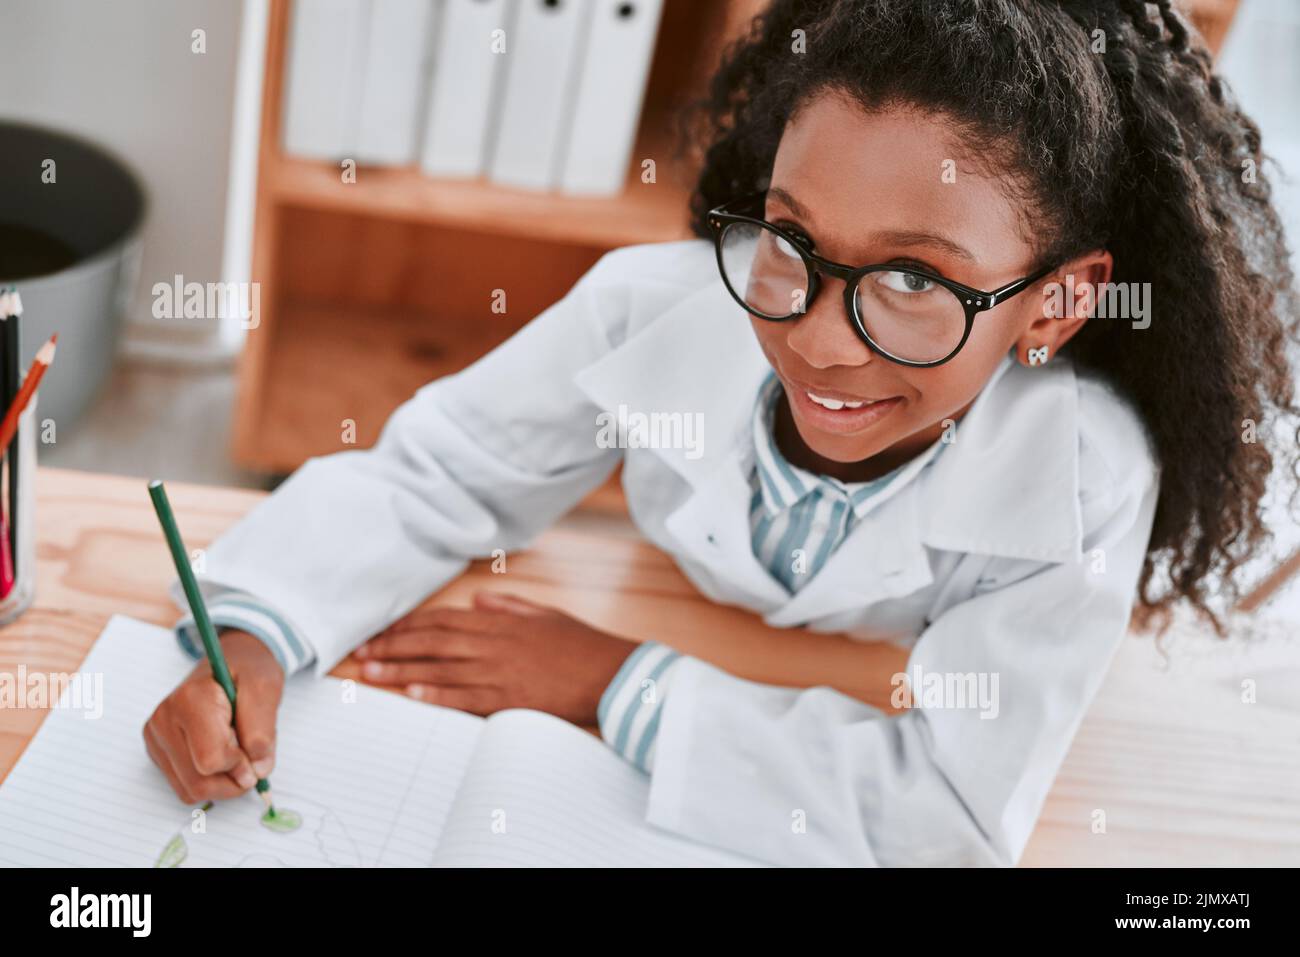 A-grades here I come. Portrait of an adorable young school girl drawing a diagram in her exercise book in science class at school. Stock Photo